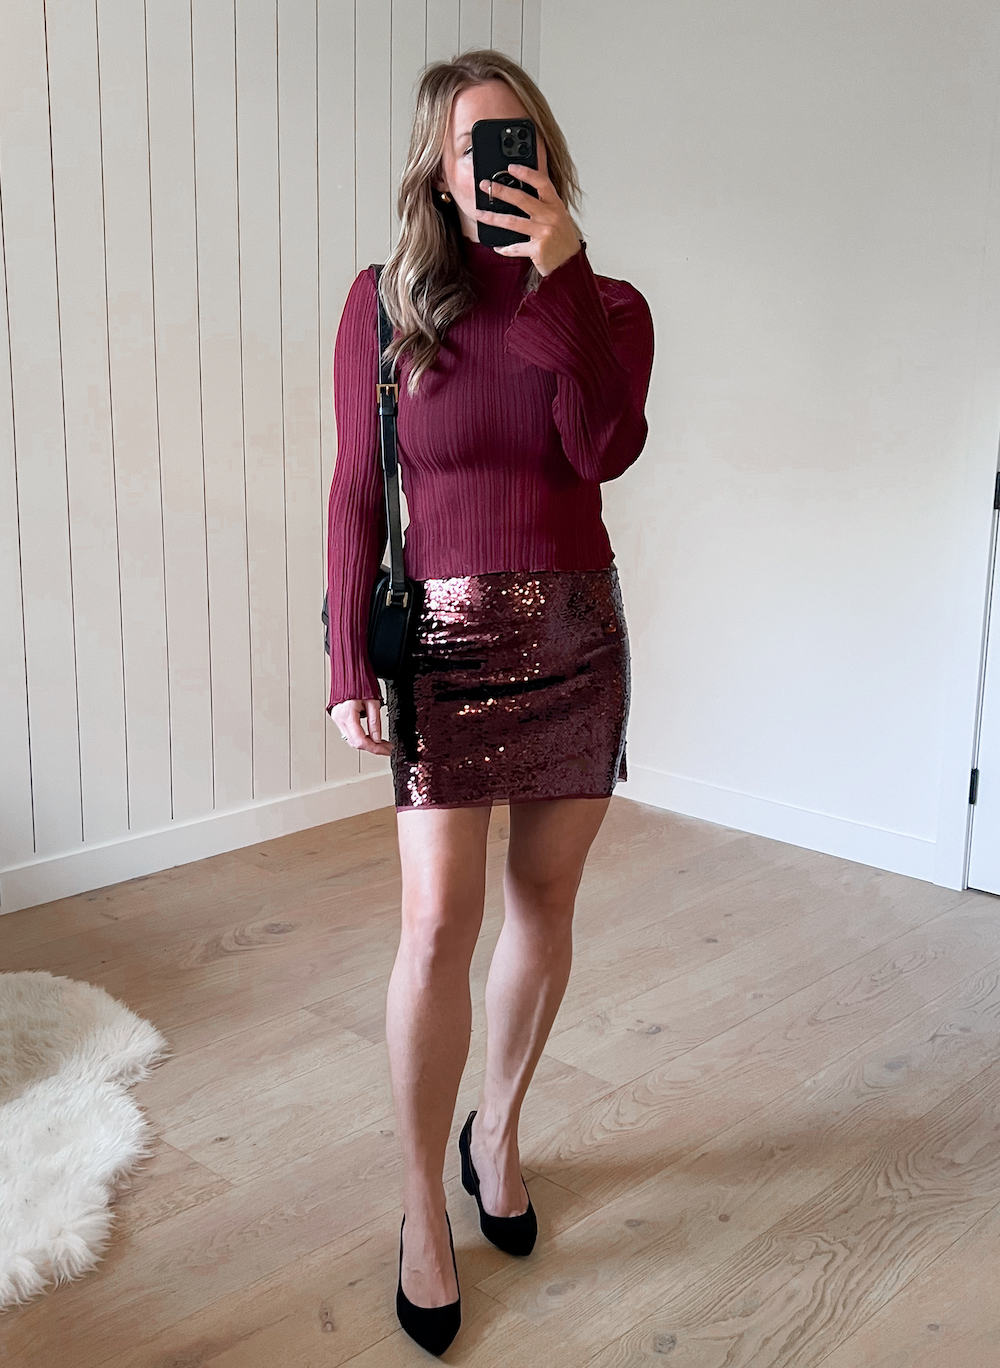 A woman wearing a sparkly burgundy mini skirt with a red knit crewneck sweater and black heels